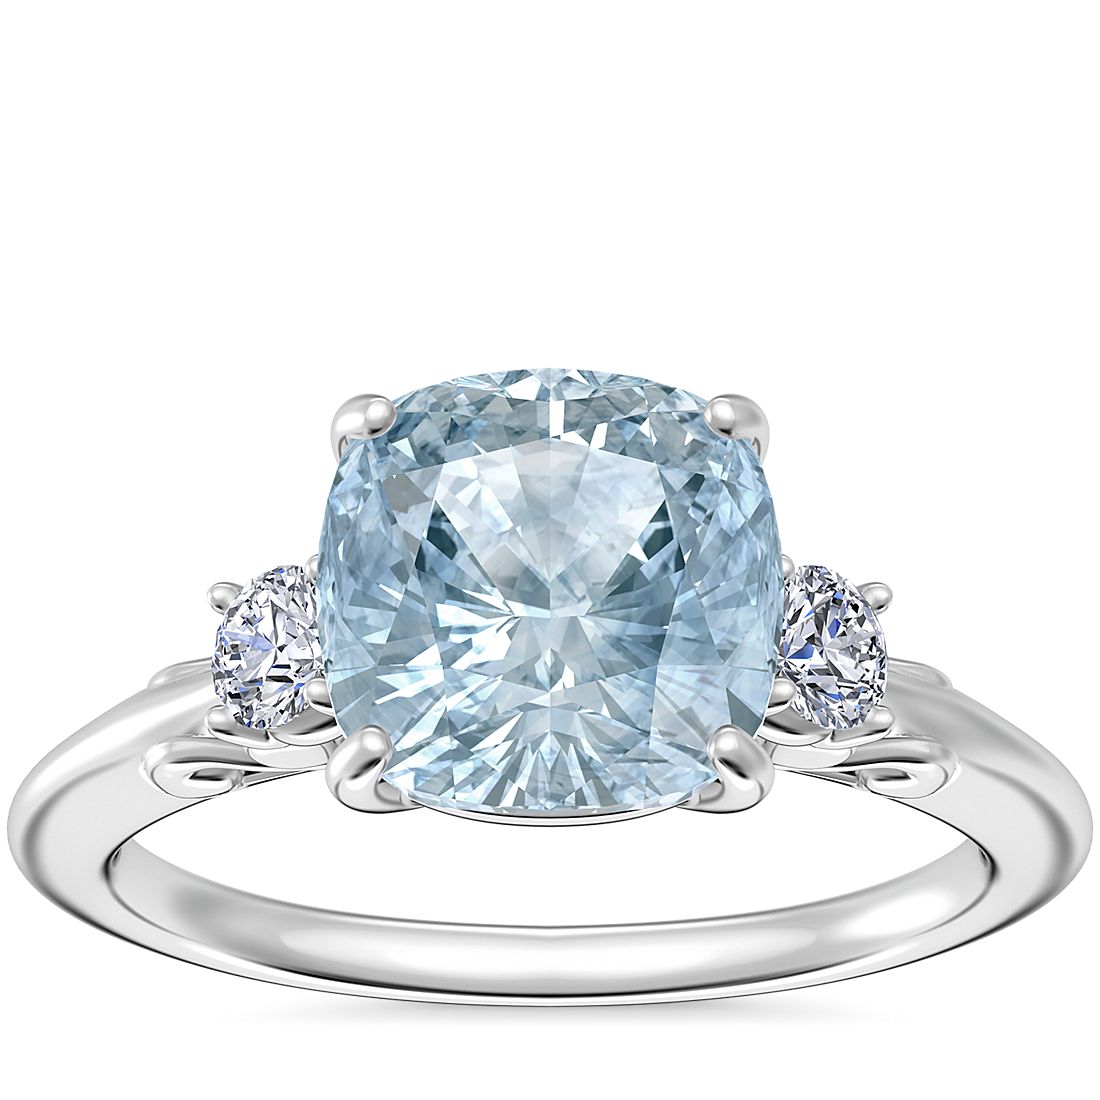 Vintage Three Stone Engagement Ring with Cushion Aquamarine in 14k White Gold (8mm)